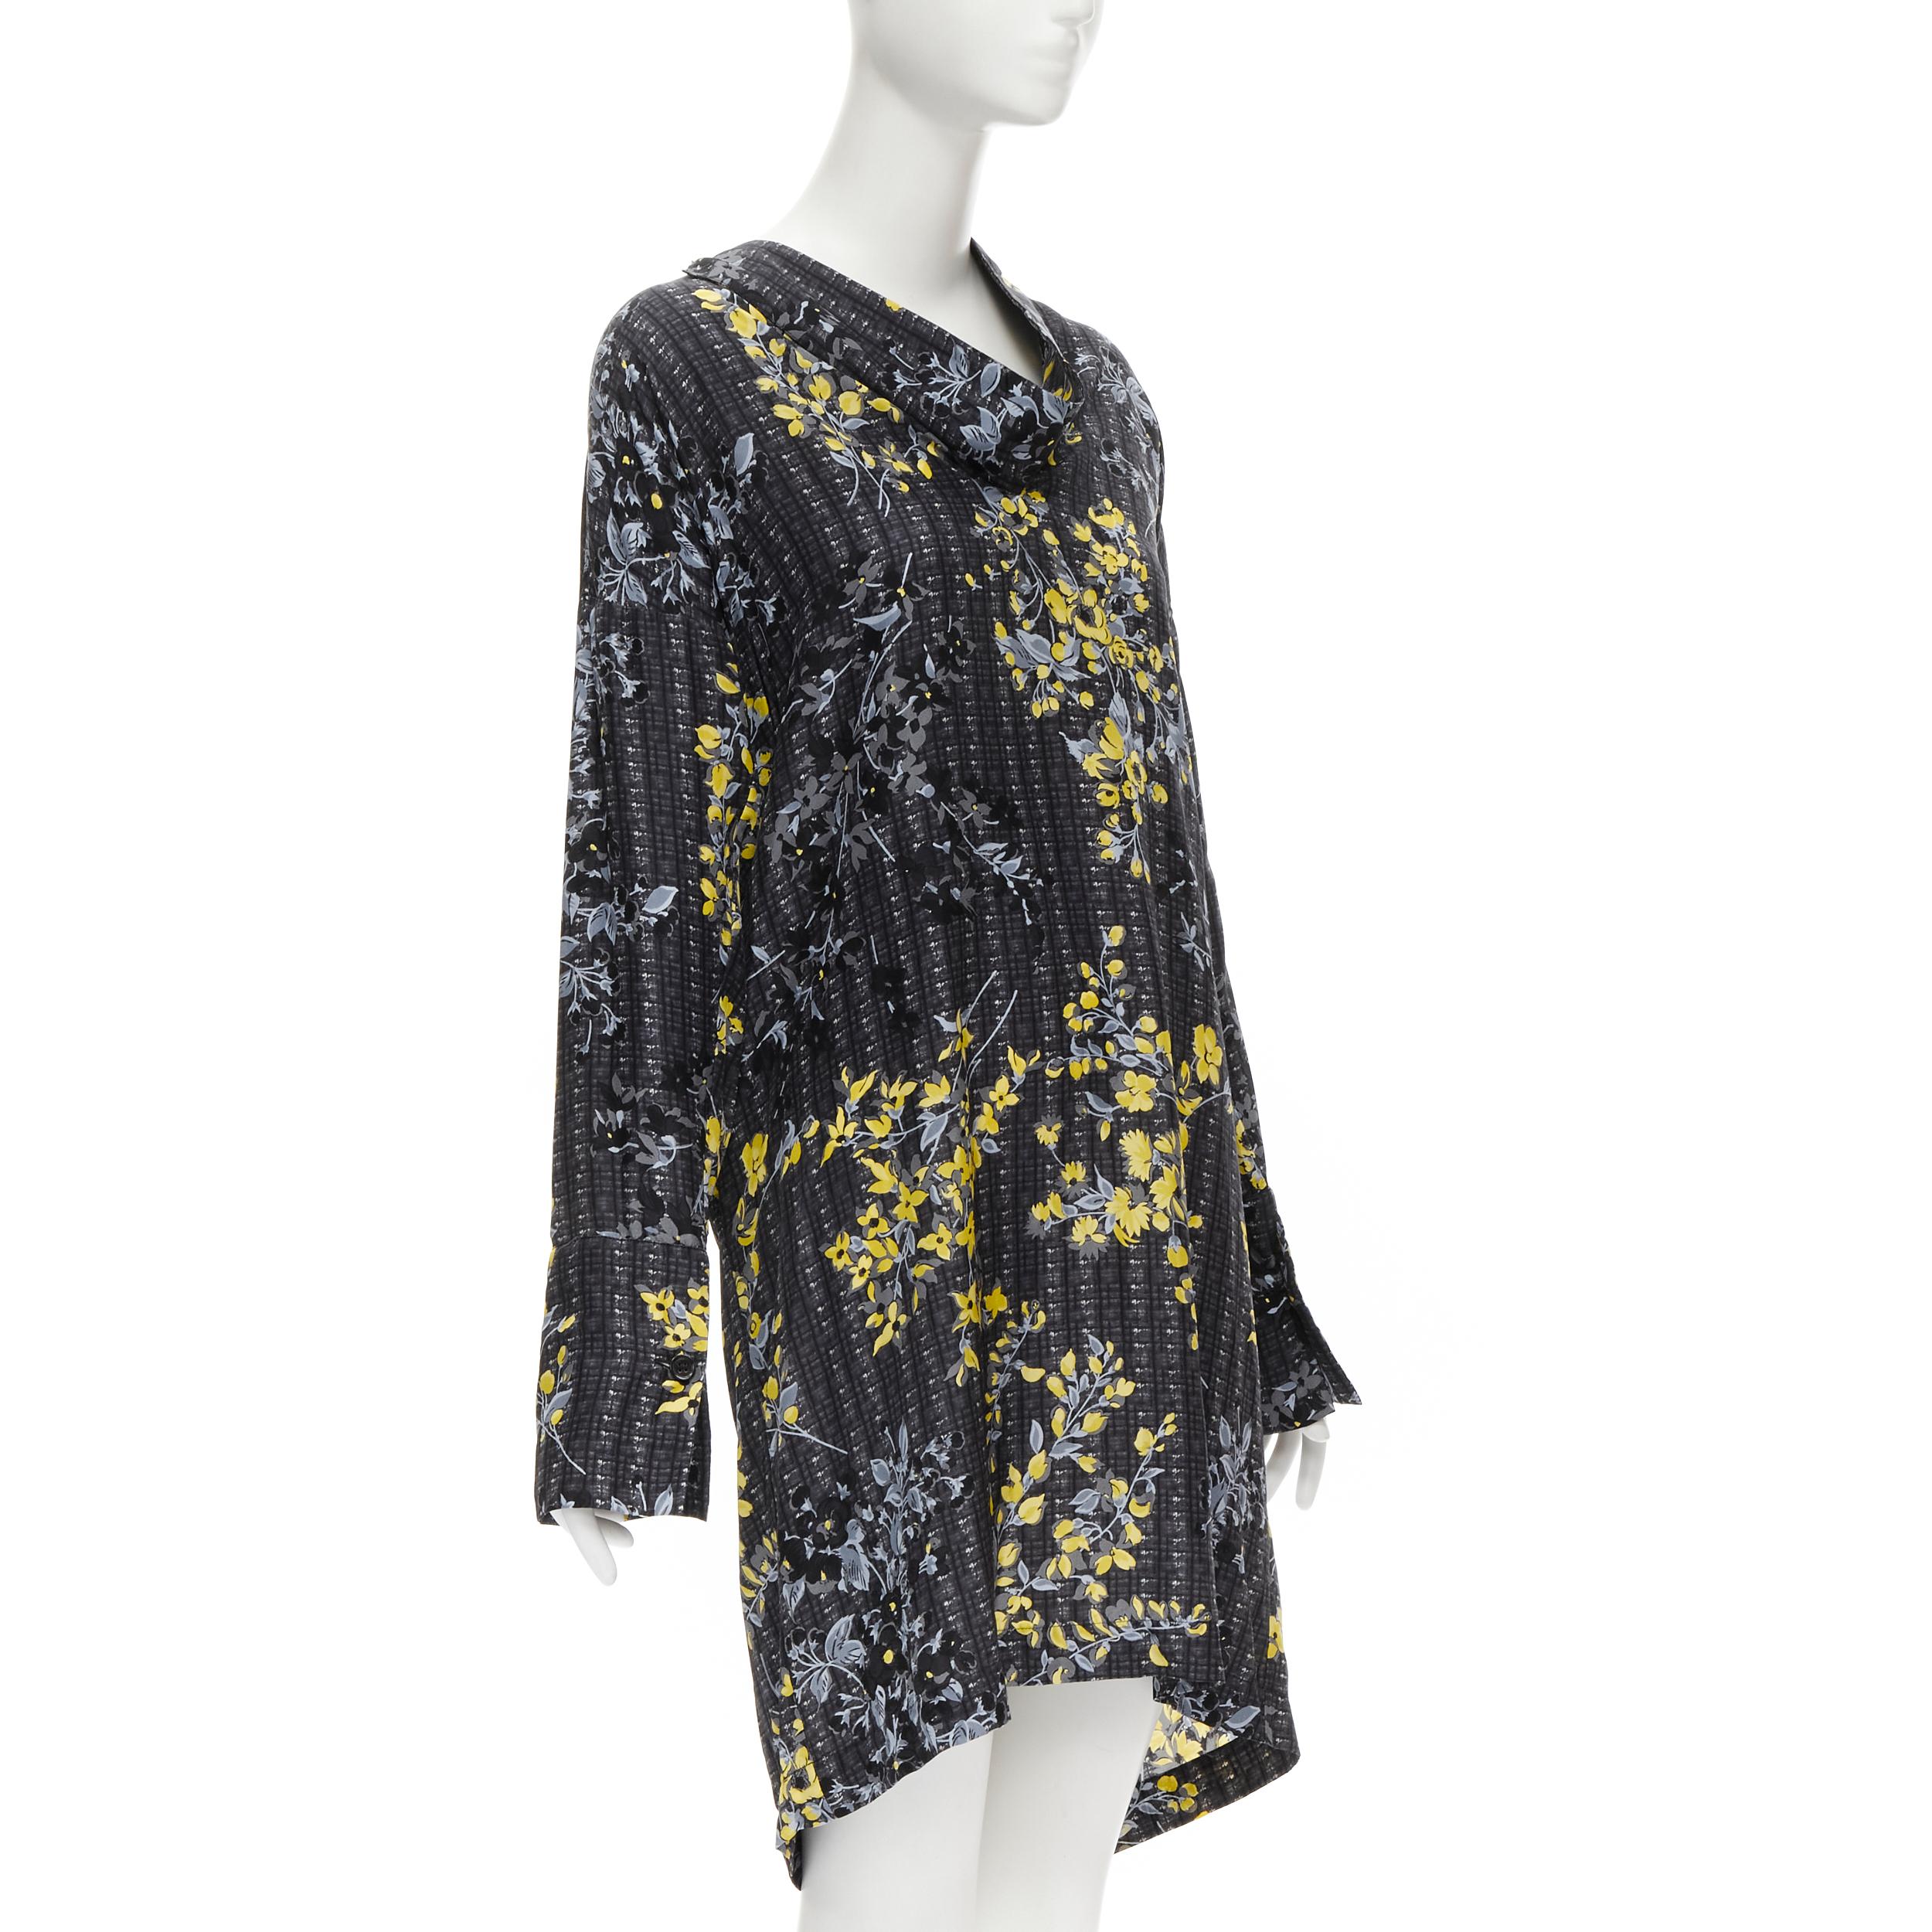 MARNI grey geometric yellow floral print cowl neck 100% silk dress IT38 XS 
Reference: CELG/A00185 
Brand: Marni 
Material: Silk 
Color: Grey 
Pattern: Floral 
Closure: Zip 
Extra Detail: Cowl neck. Button cuff. 
Made in: Italy 

CONDITION: